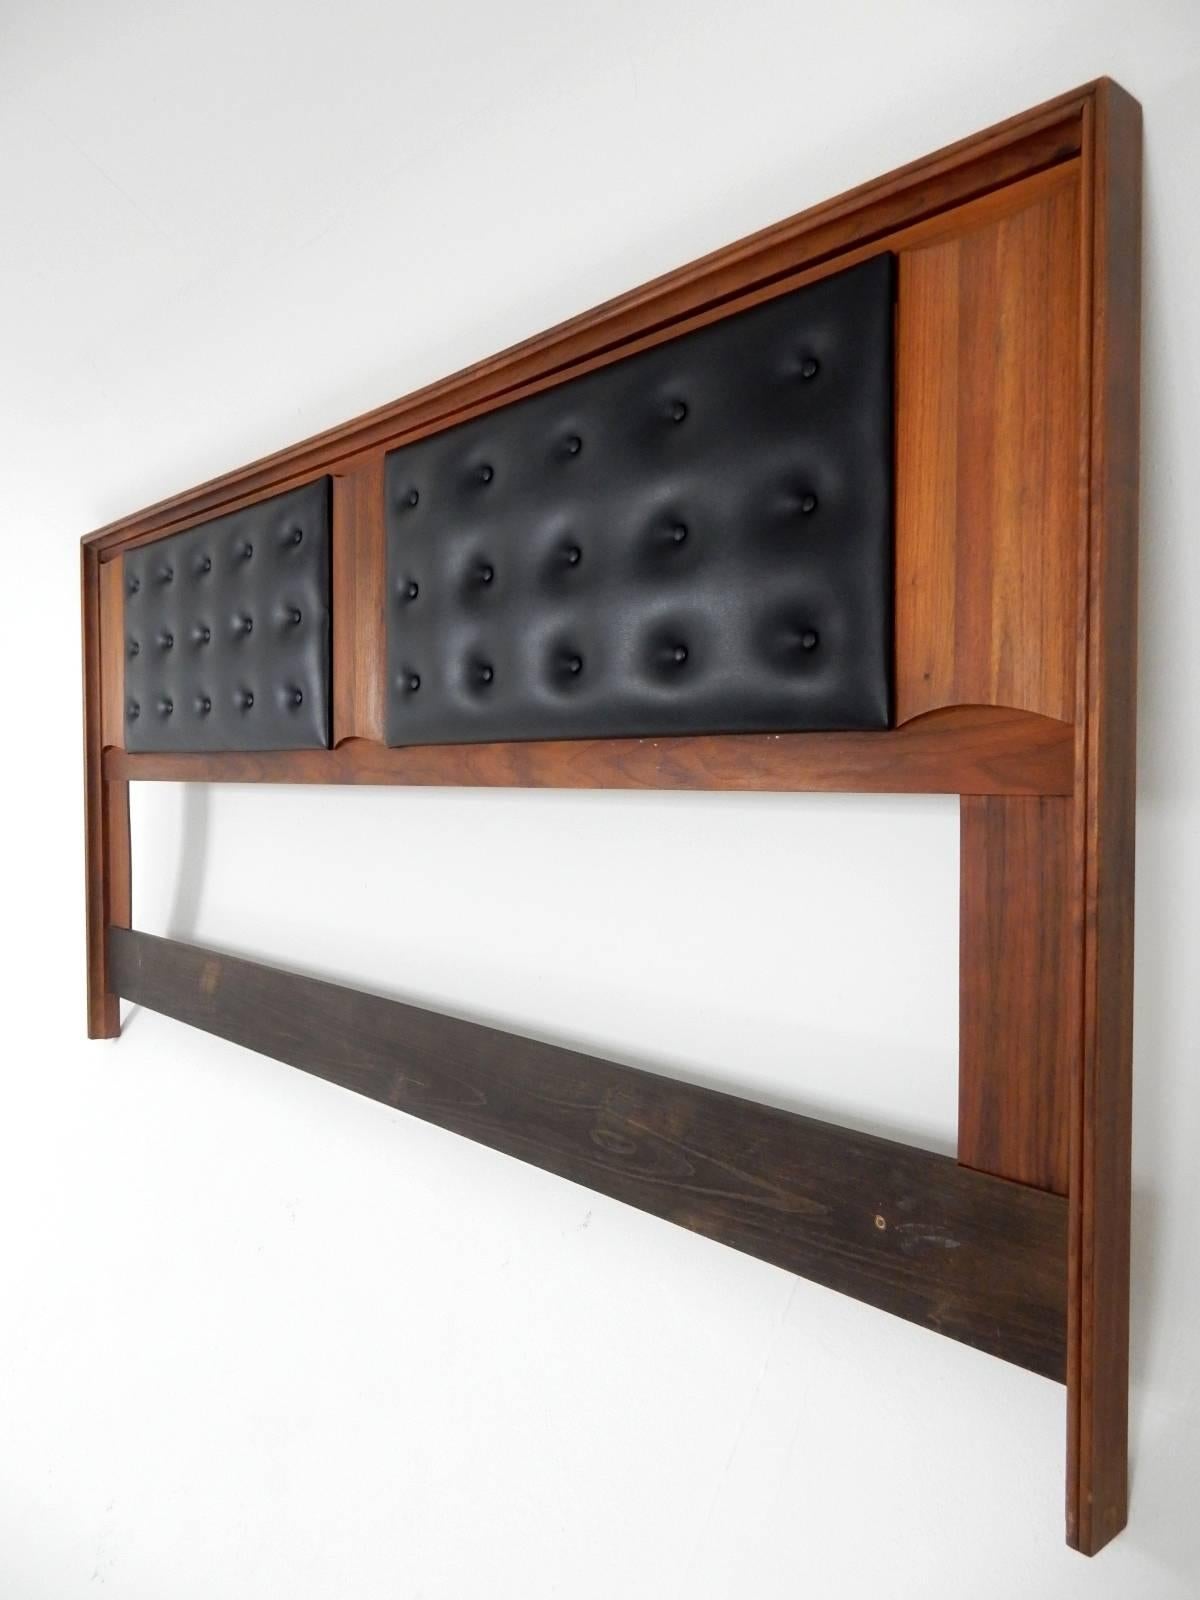 Walnut and tufted fabric kingsize headboard designed by John Keal for Brown-Saltman, circa 1960s.
Excellent condition. Very clean with no damage.